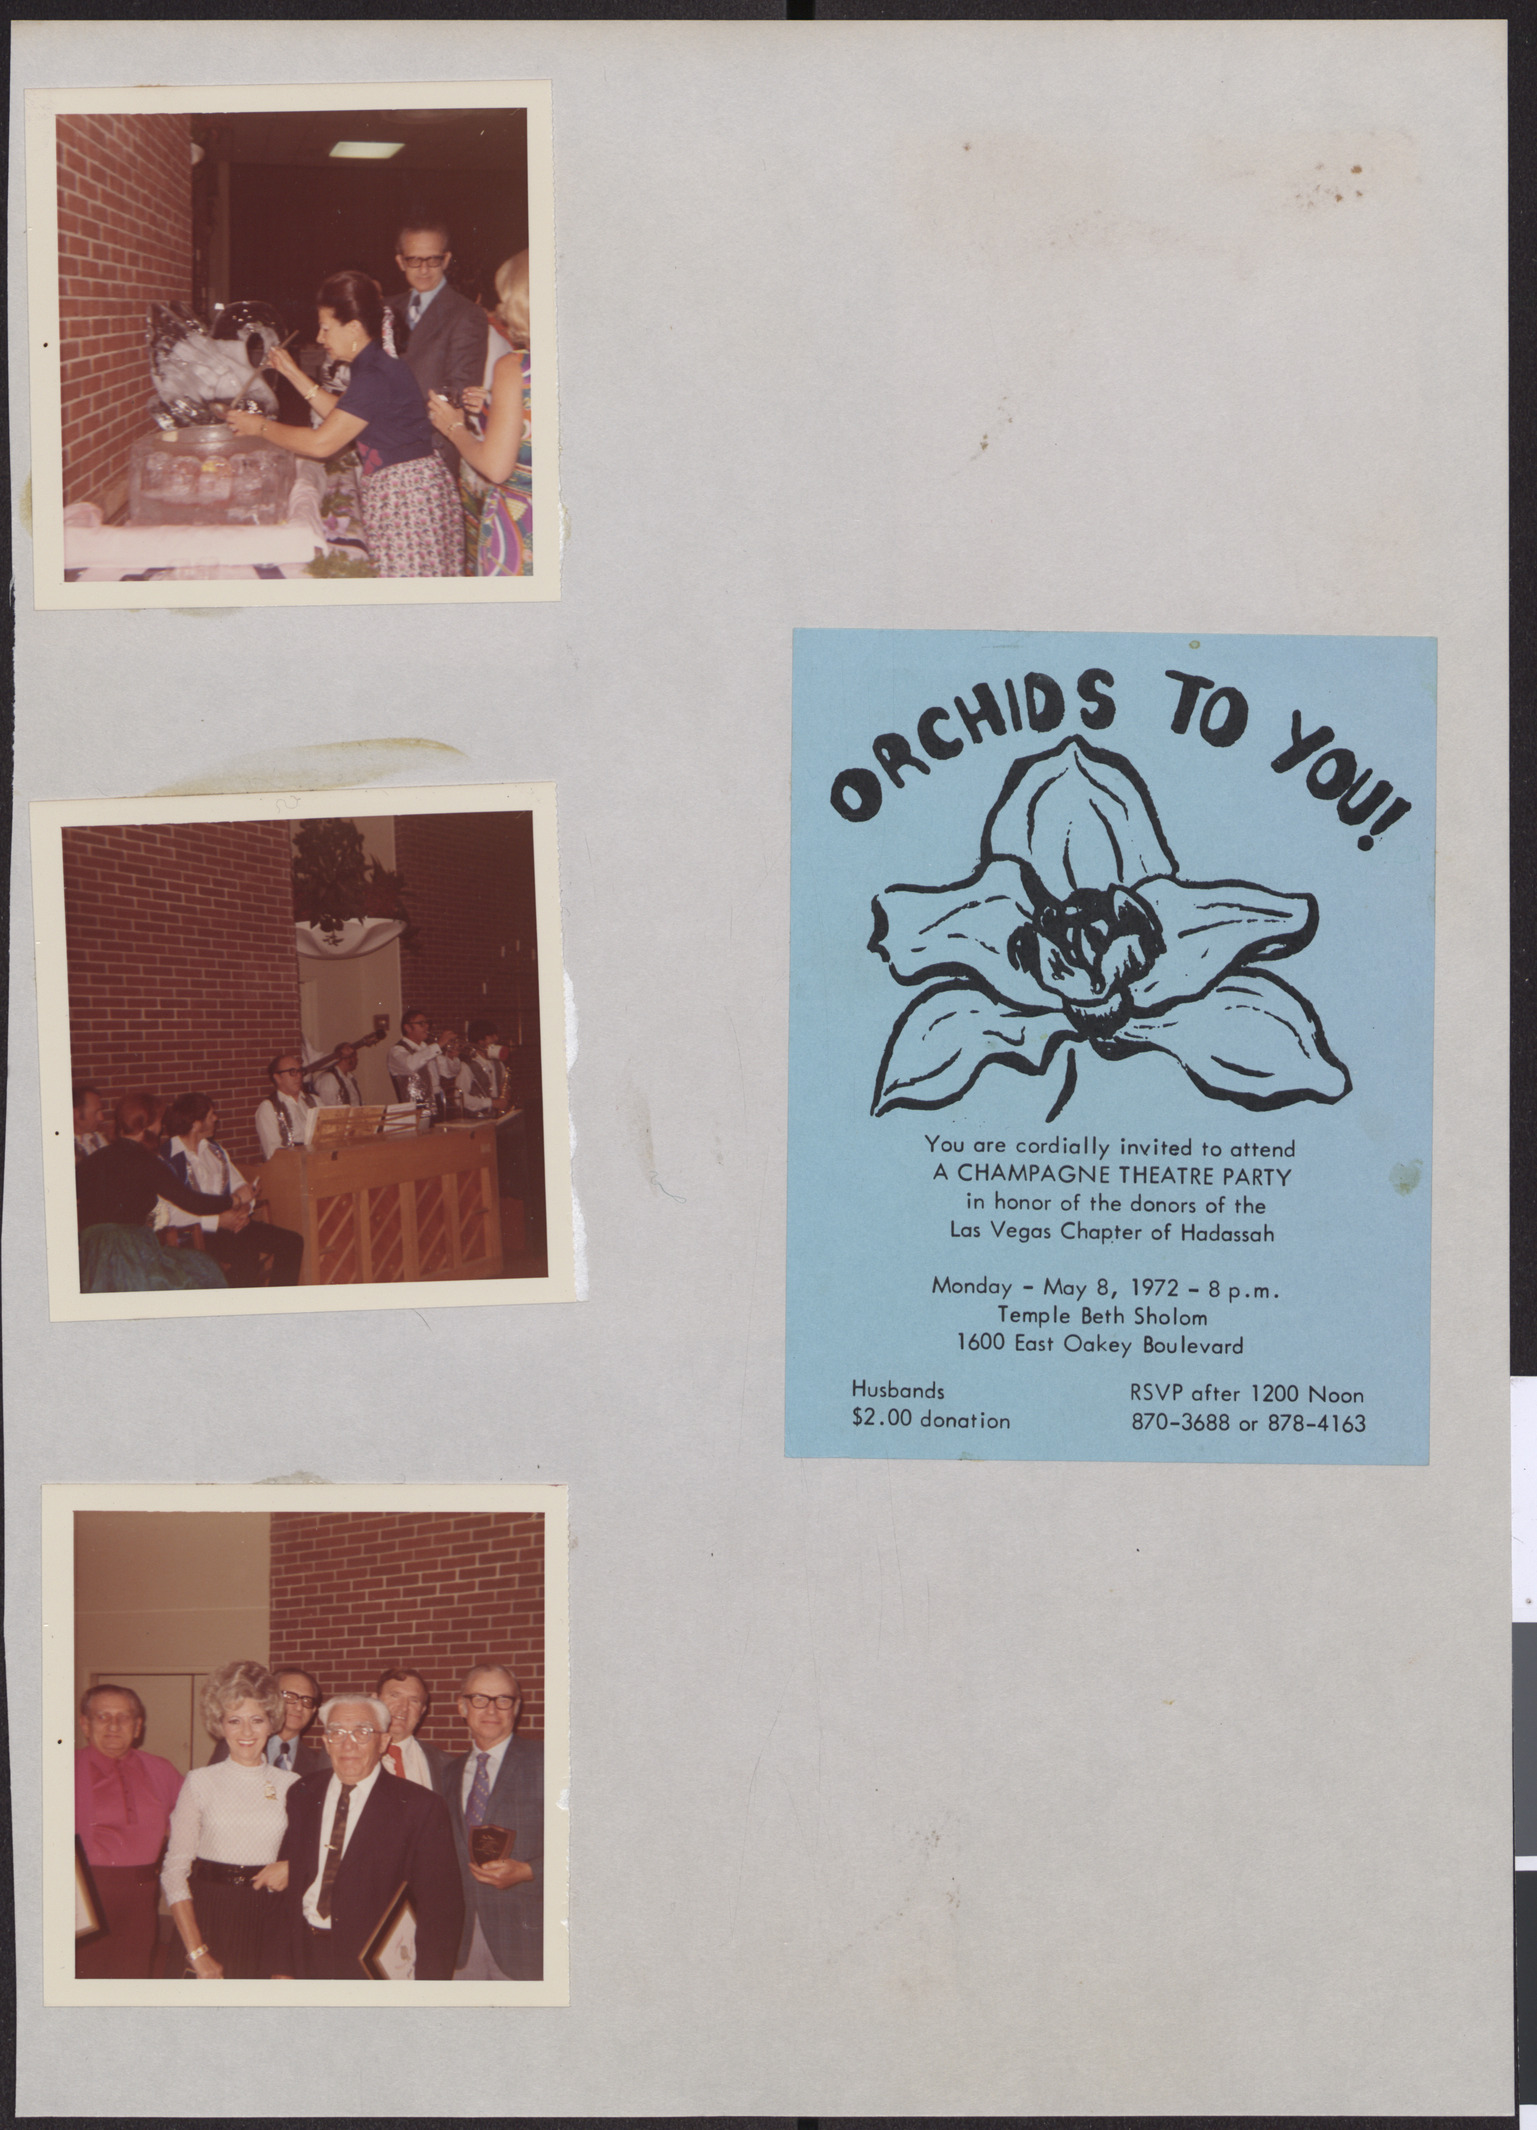 Photographs of theatre party, and invitation to the event, May 8, 1972